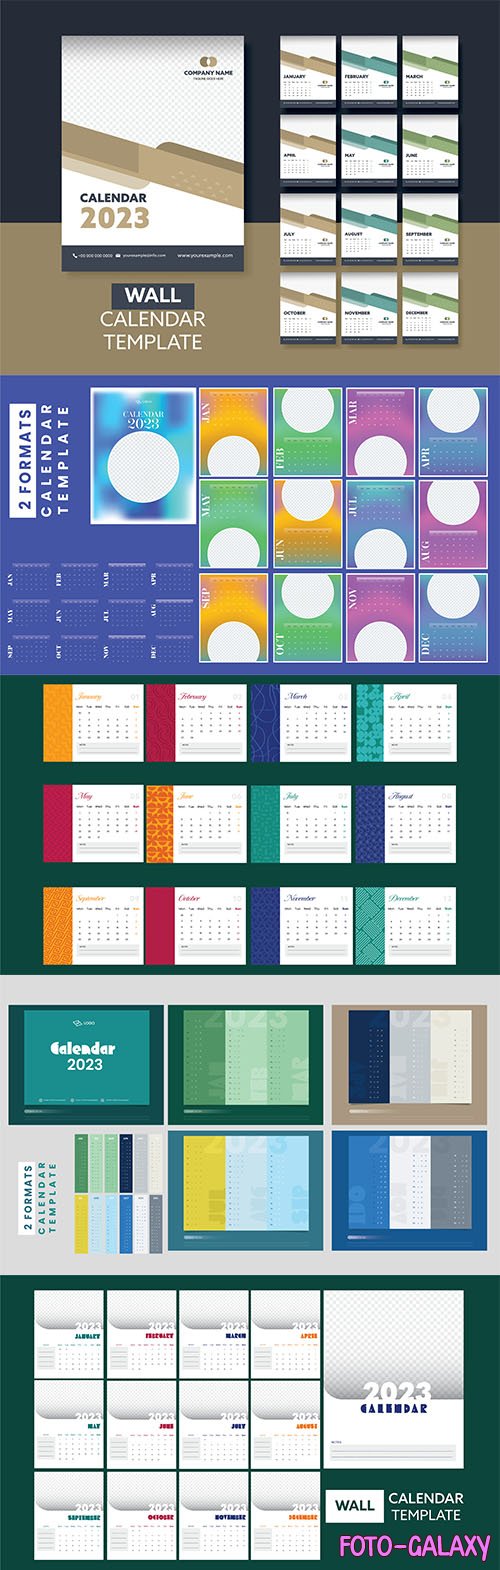 Calendar 2023 colorful design template for happy new year